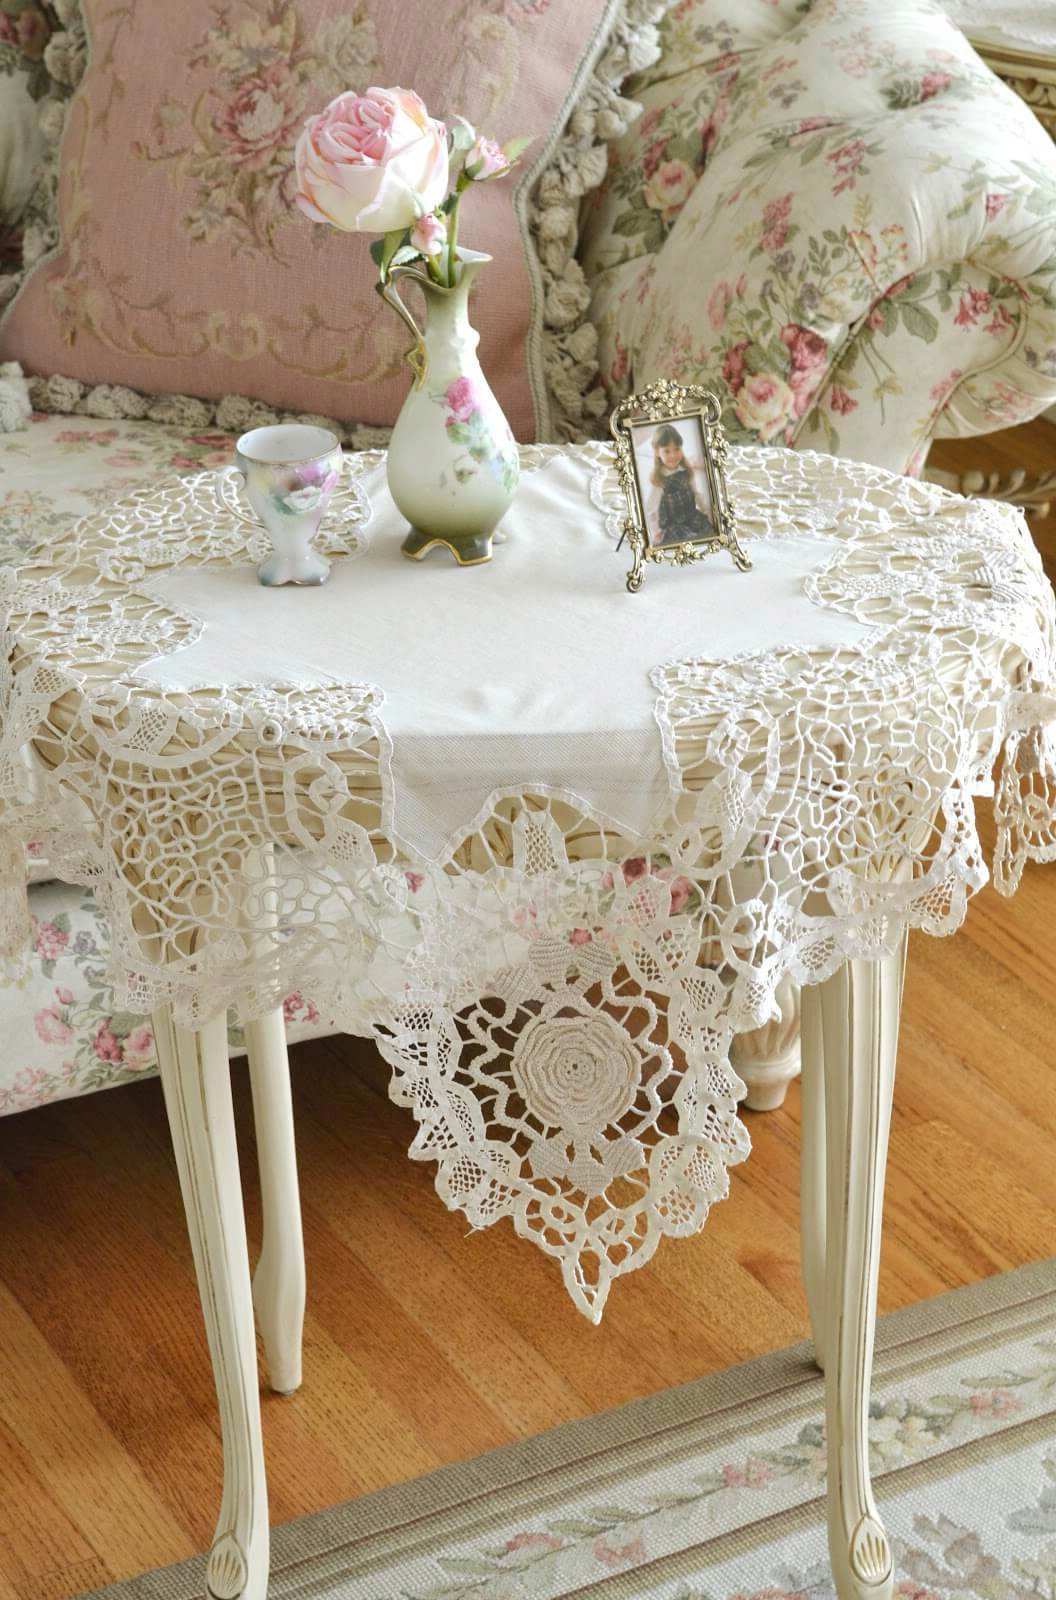 Looking For 60 Inch Round Tablecloth For Casual Dining? Check Out Here | Table Covers Depot